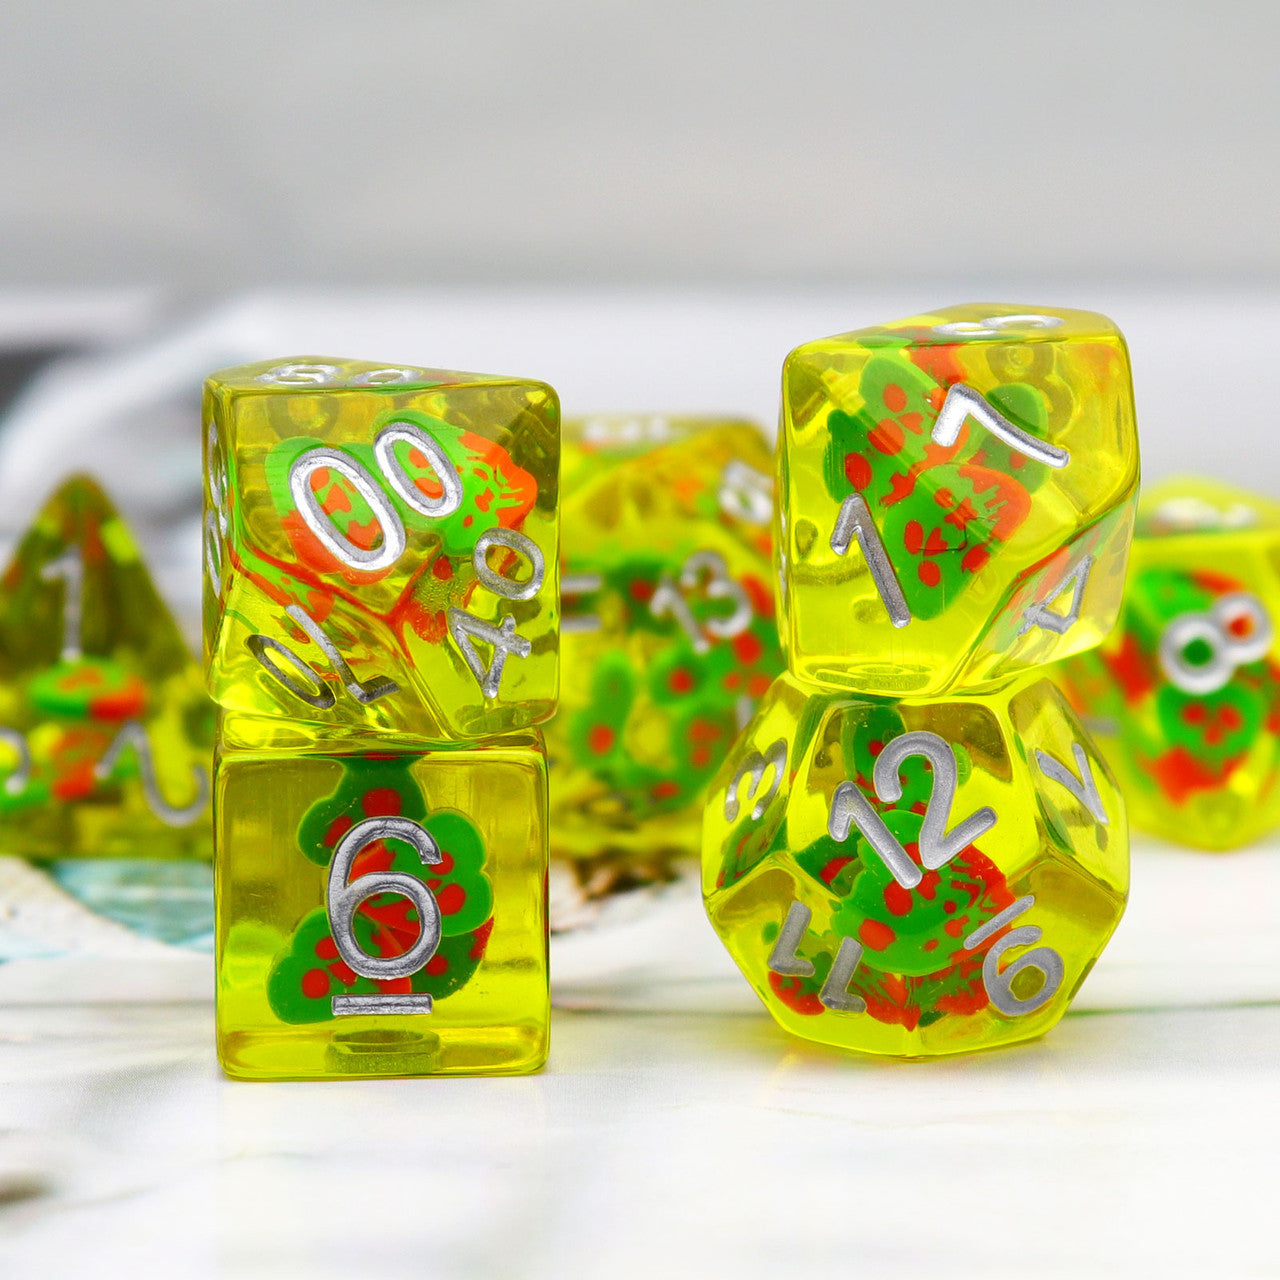 red green dice, yellow dice, olive dice, dnd die, rpg dice, resin dice, filled dice, filled resin dice, dice set, dnd dice set, rpg dice set, haxtec dice, ghost face dice, ghost dice, halloween dice, spirit dice